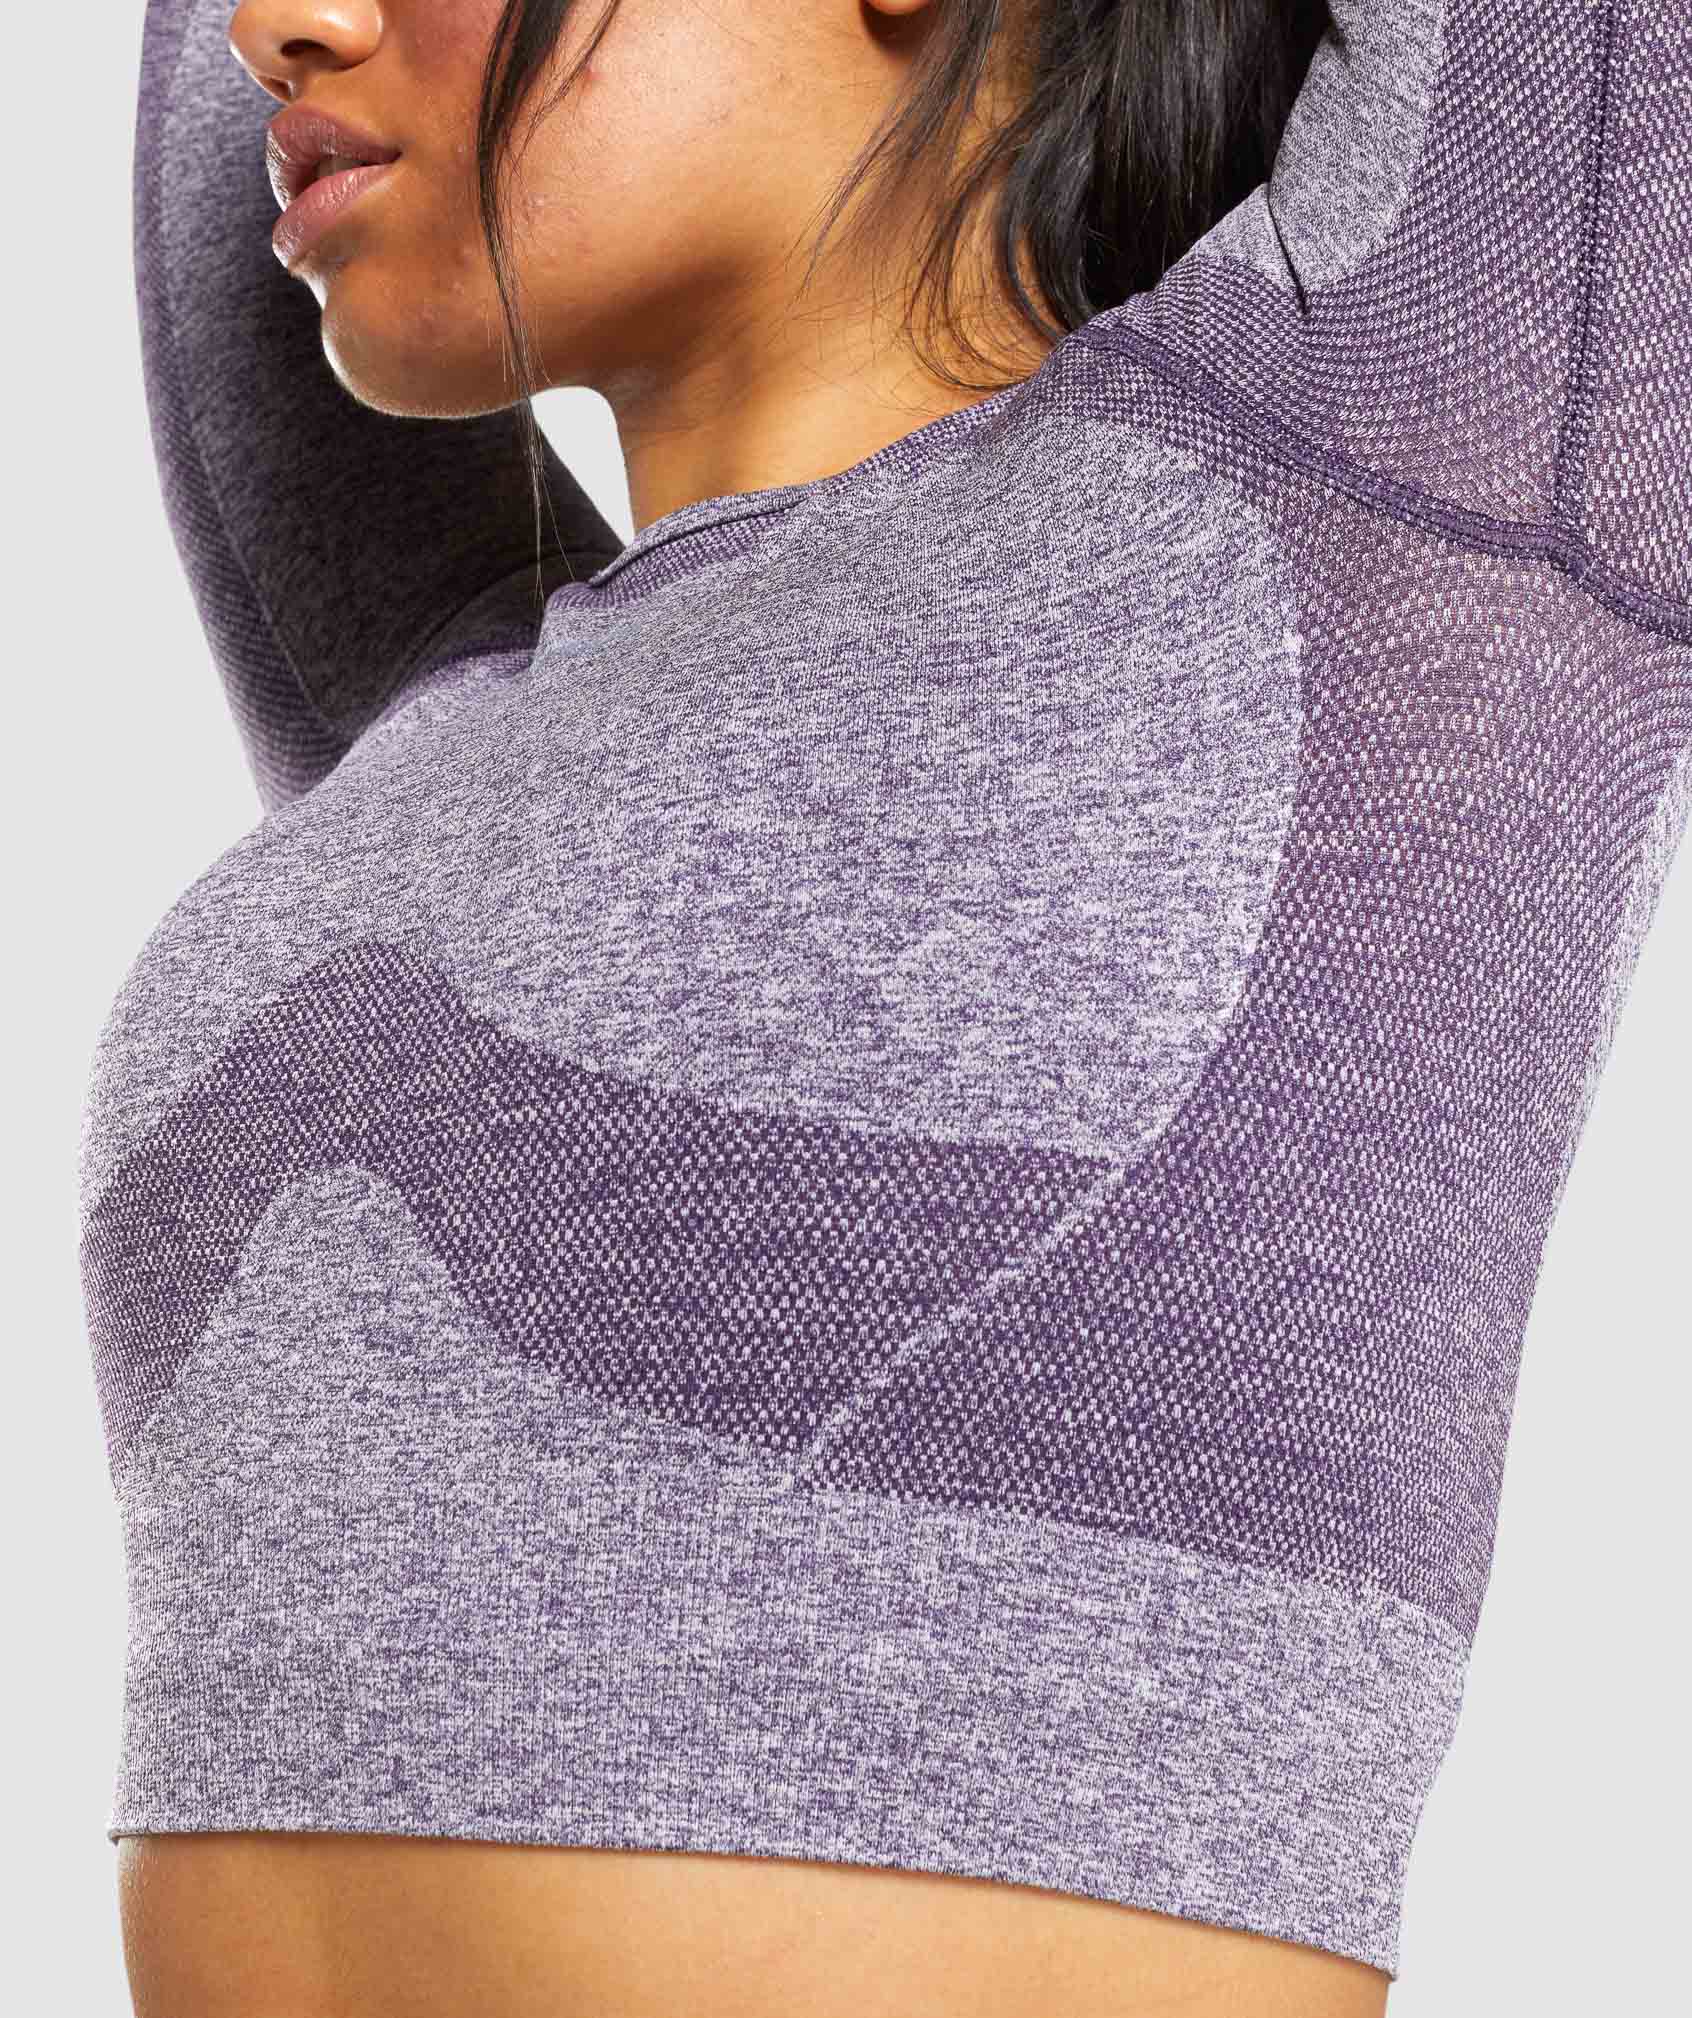 Purple sports top with long sleeves and cut neckline